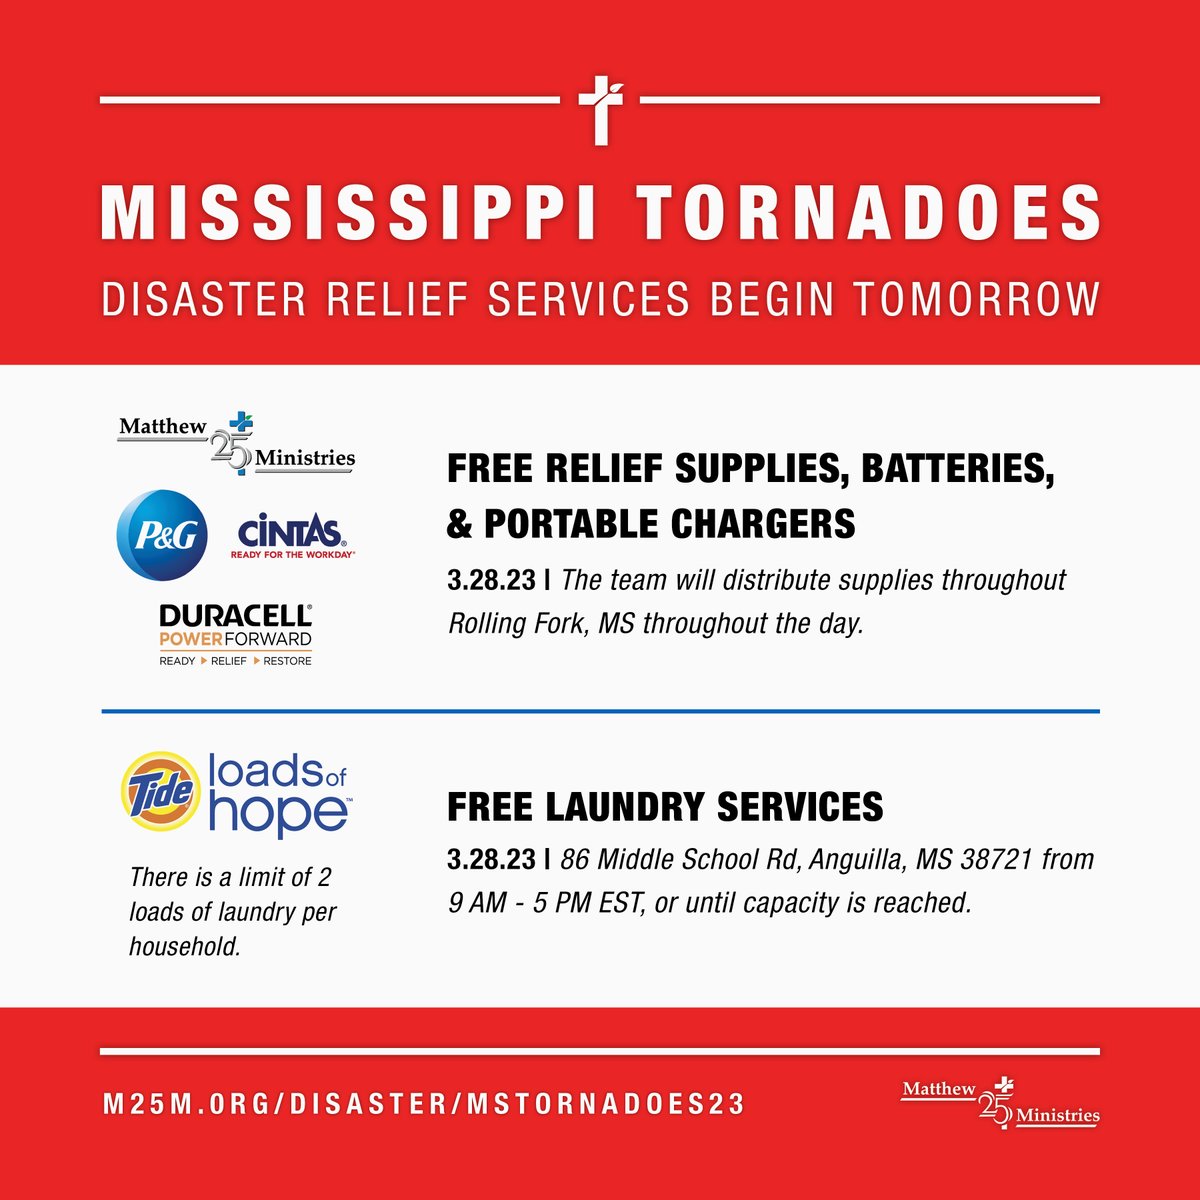 Our team arrived in Rolling Fork, MS and will begin providing relief supplies & services tomorrow, 3/28 for people affected by the tornadoes. @Tide Loads of Hope will be at 86 Middle School Rd, Anguilla, MS 38721 from 9 AM - 5 PM. Visit m25m.org/disaster/mstor… for updates.